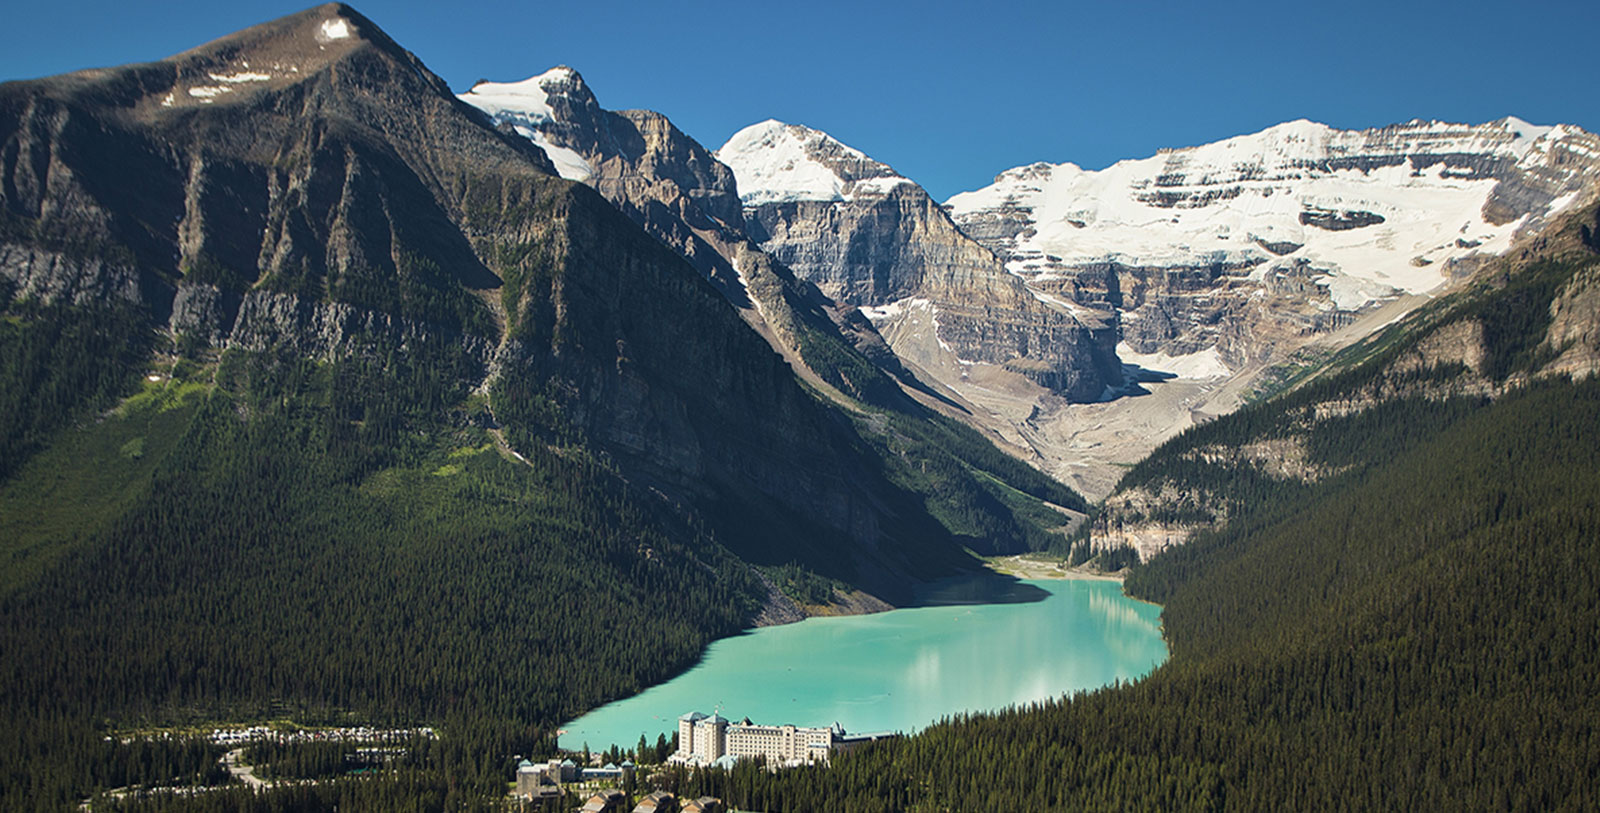 Go discover the natural wonders of Banff National Park, a UNESCO World Heritage Site.